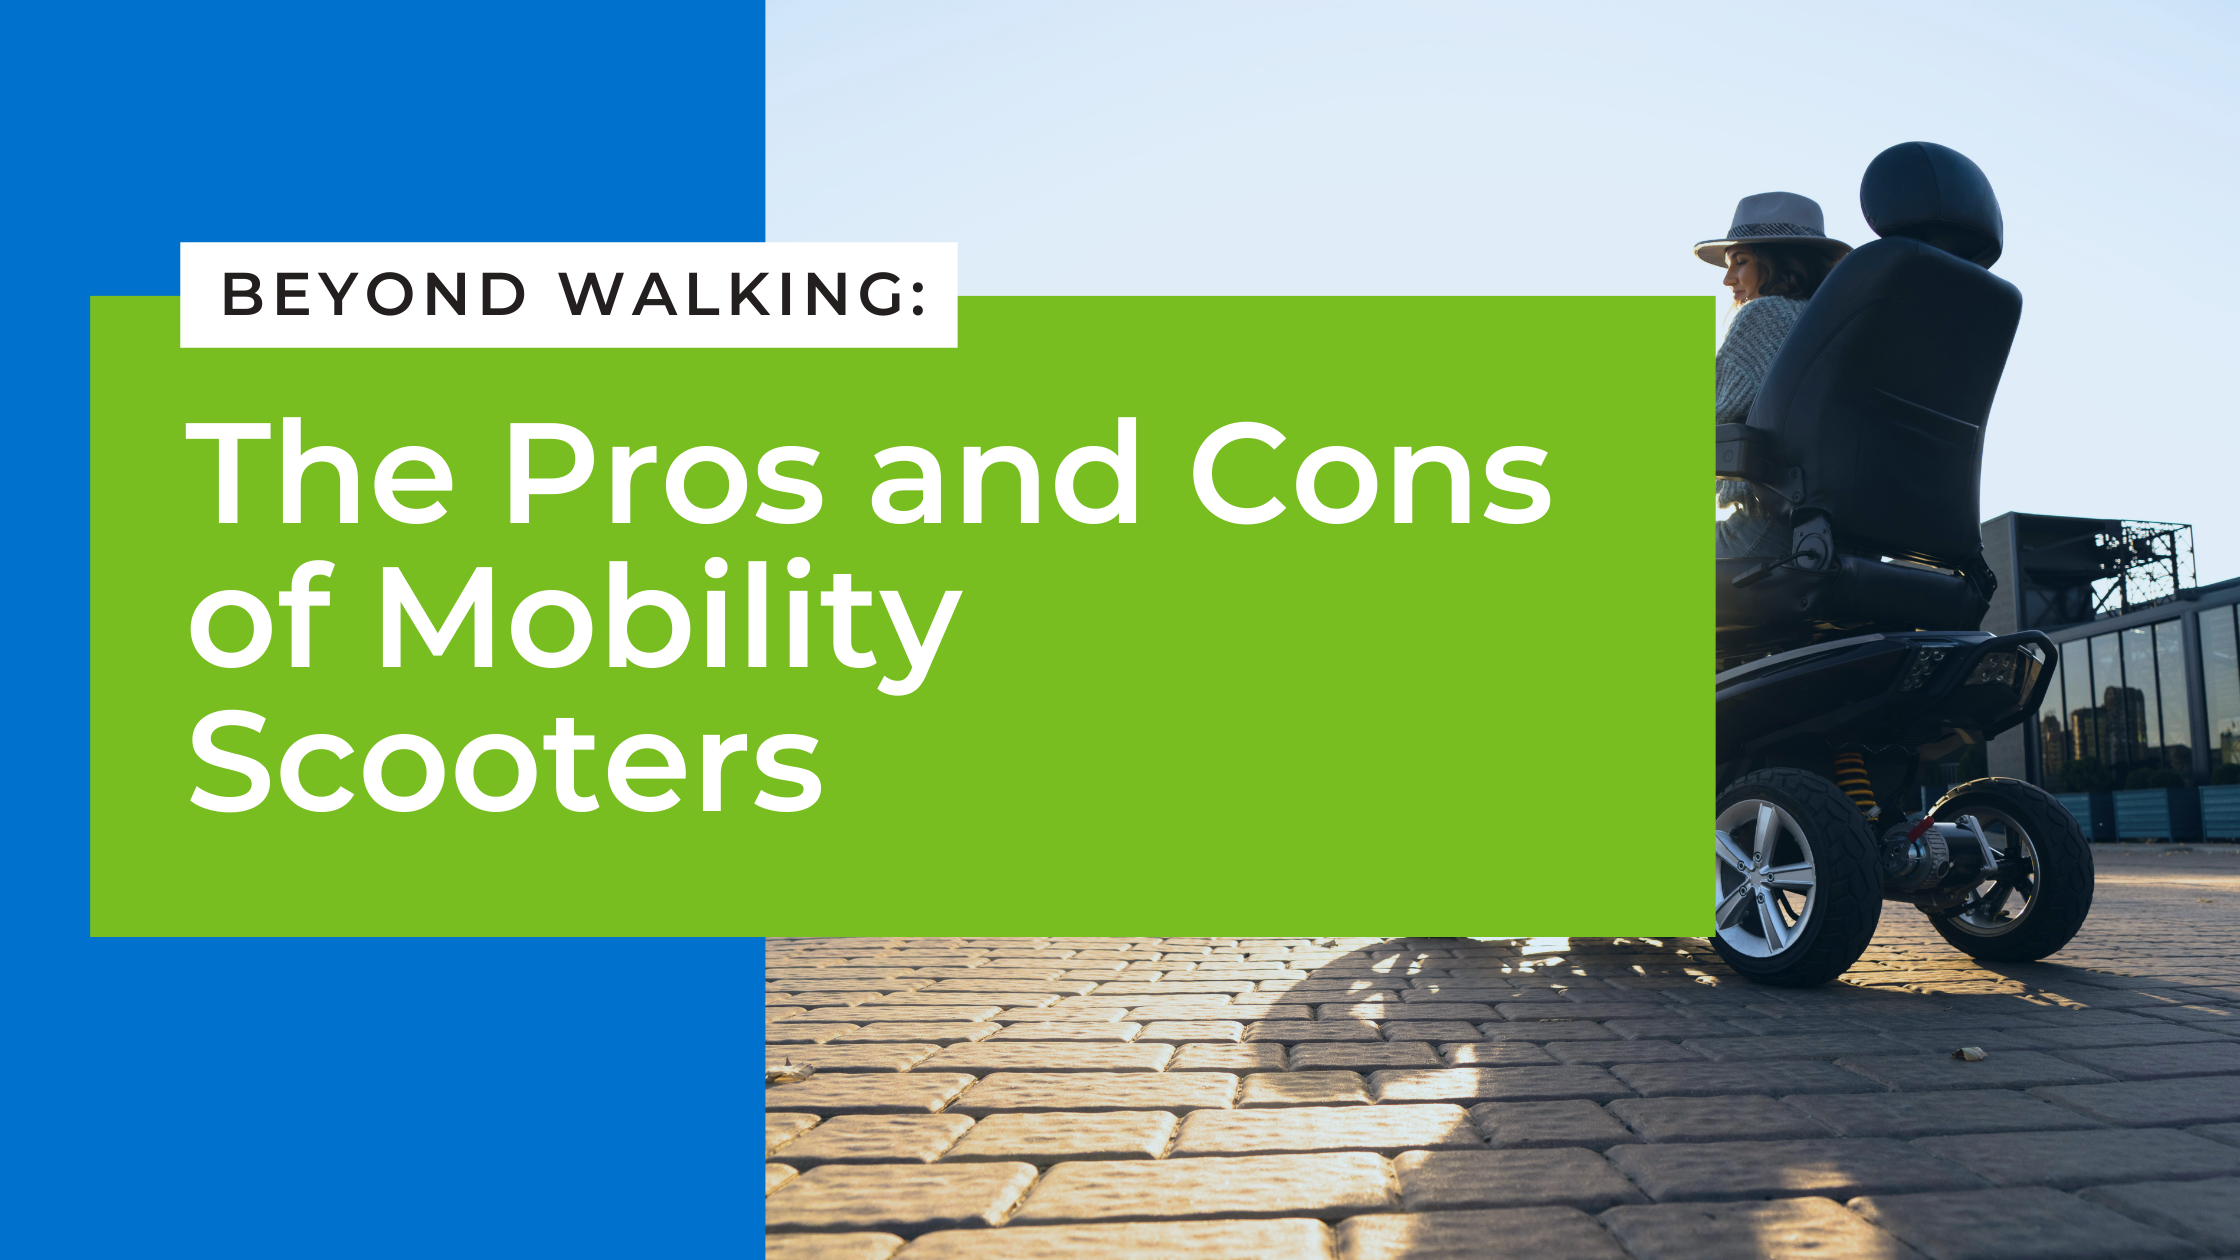 The Pros and Cons of Mobility Scooters